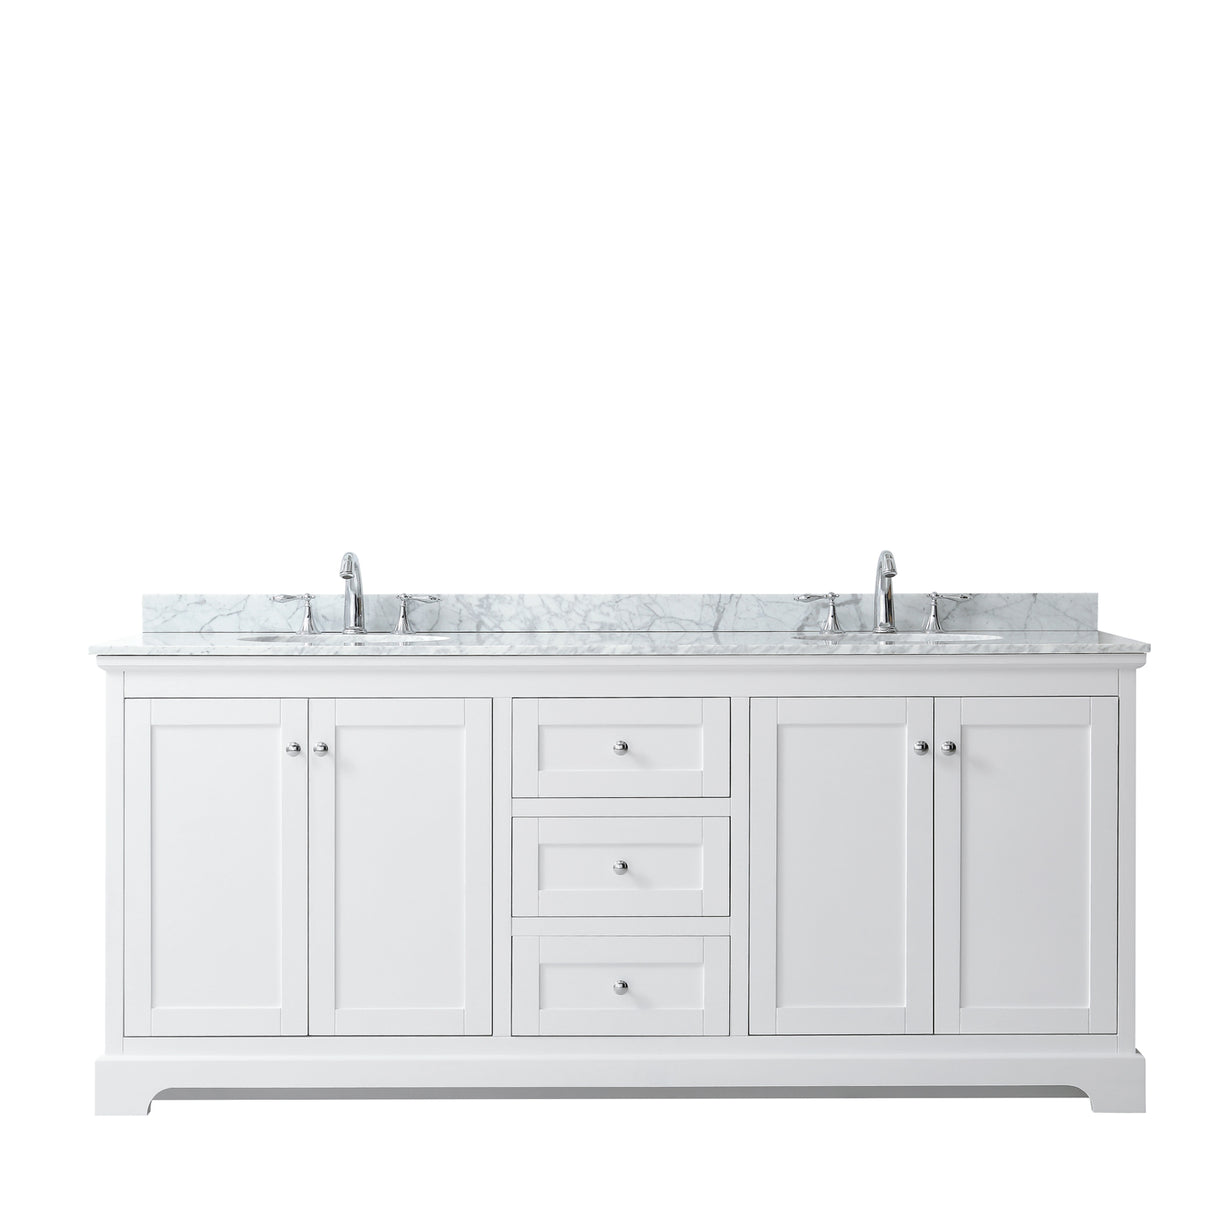 Avery 80 Inch Double Bathroom Vanity in White White Carrara Marble Countertop Undermount Oval Sinks and No Mirror